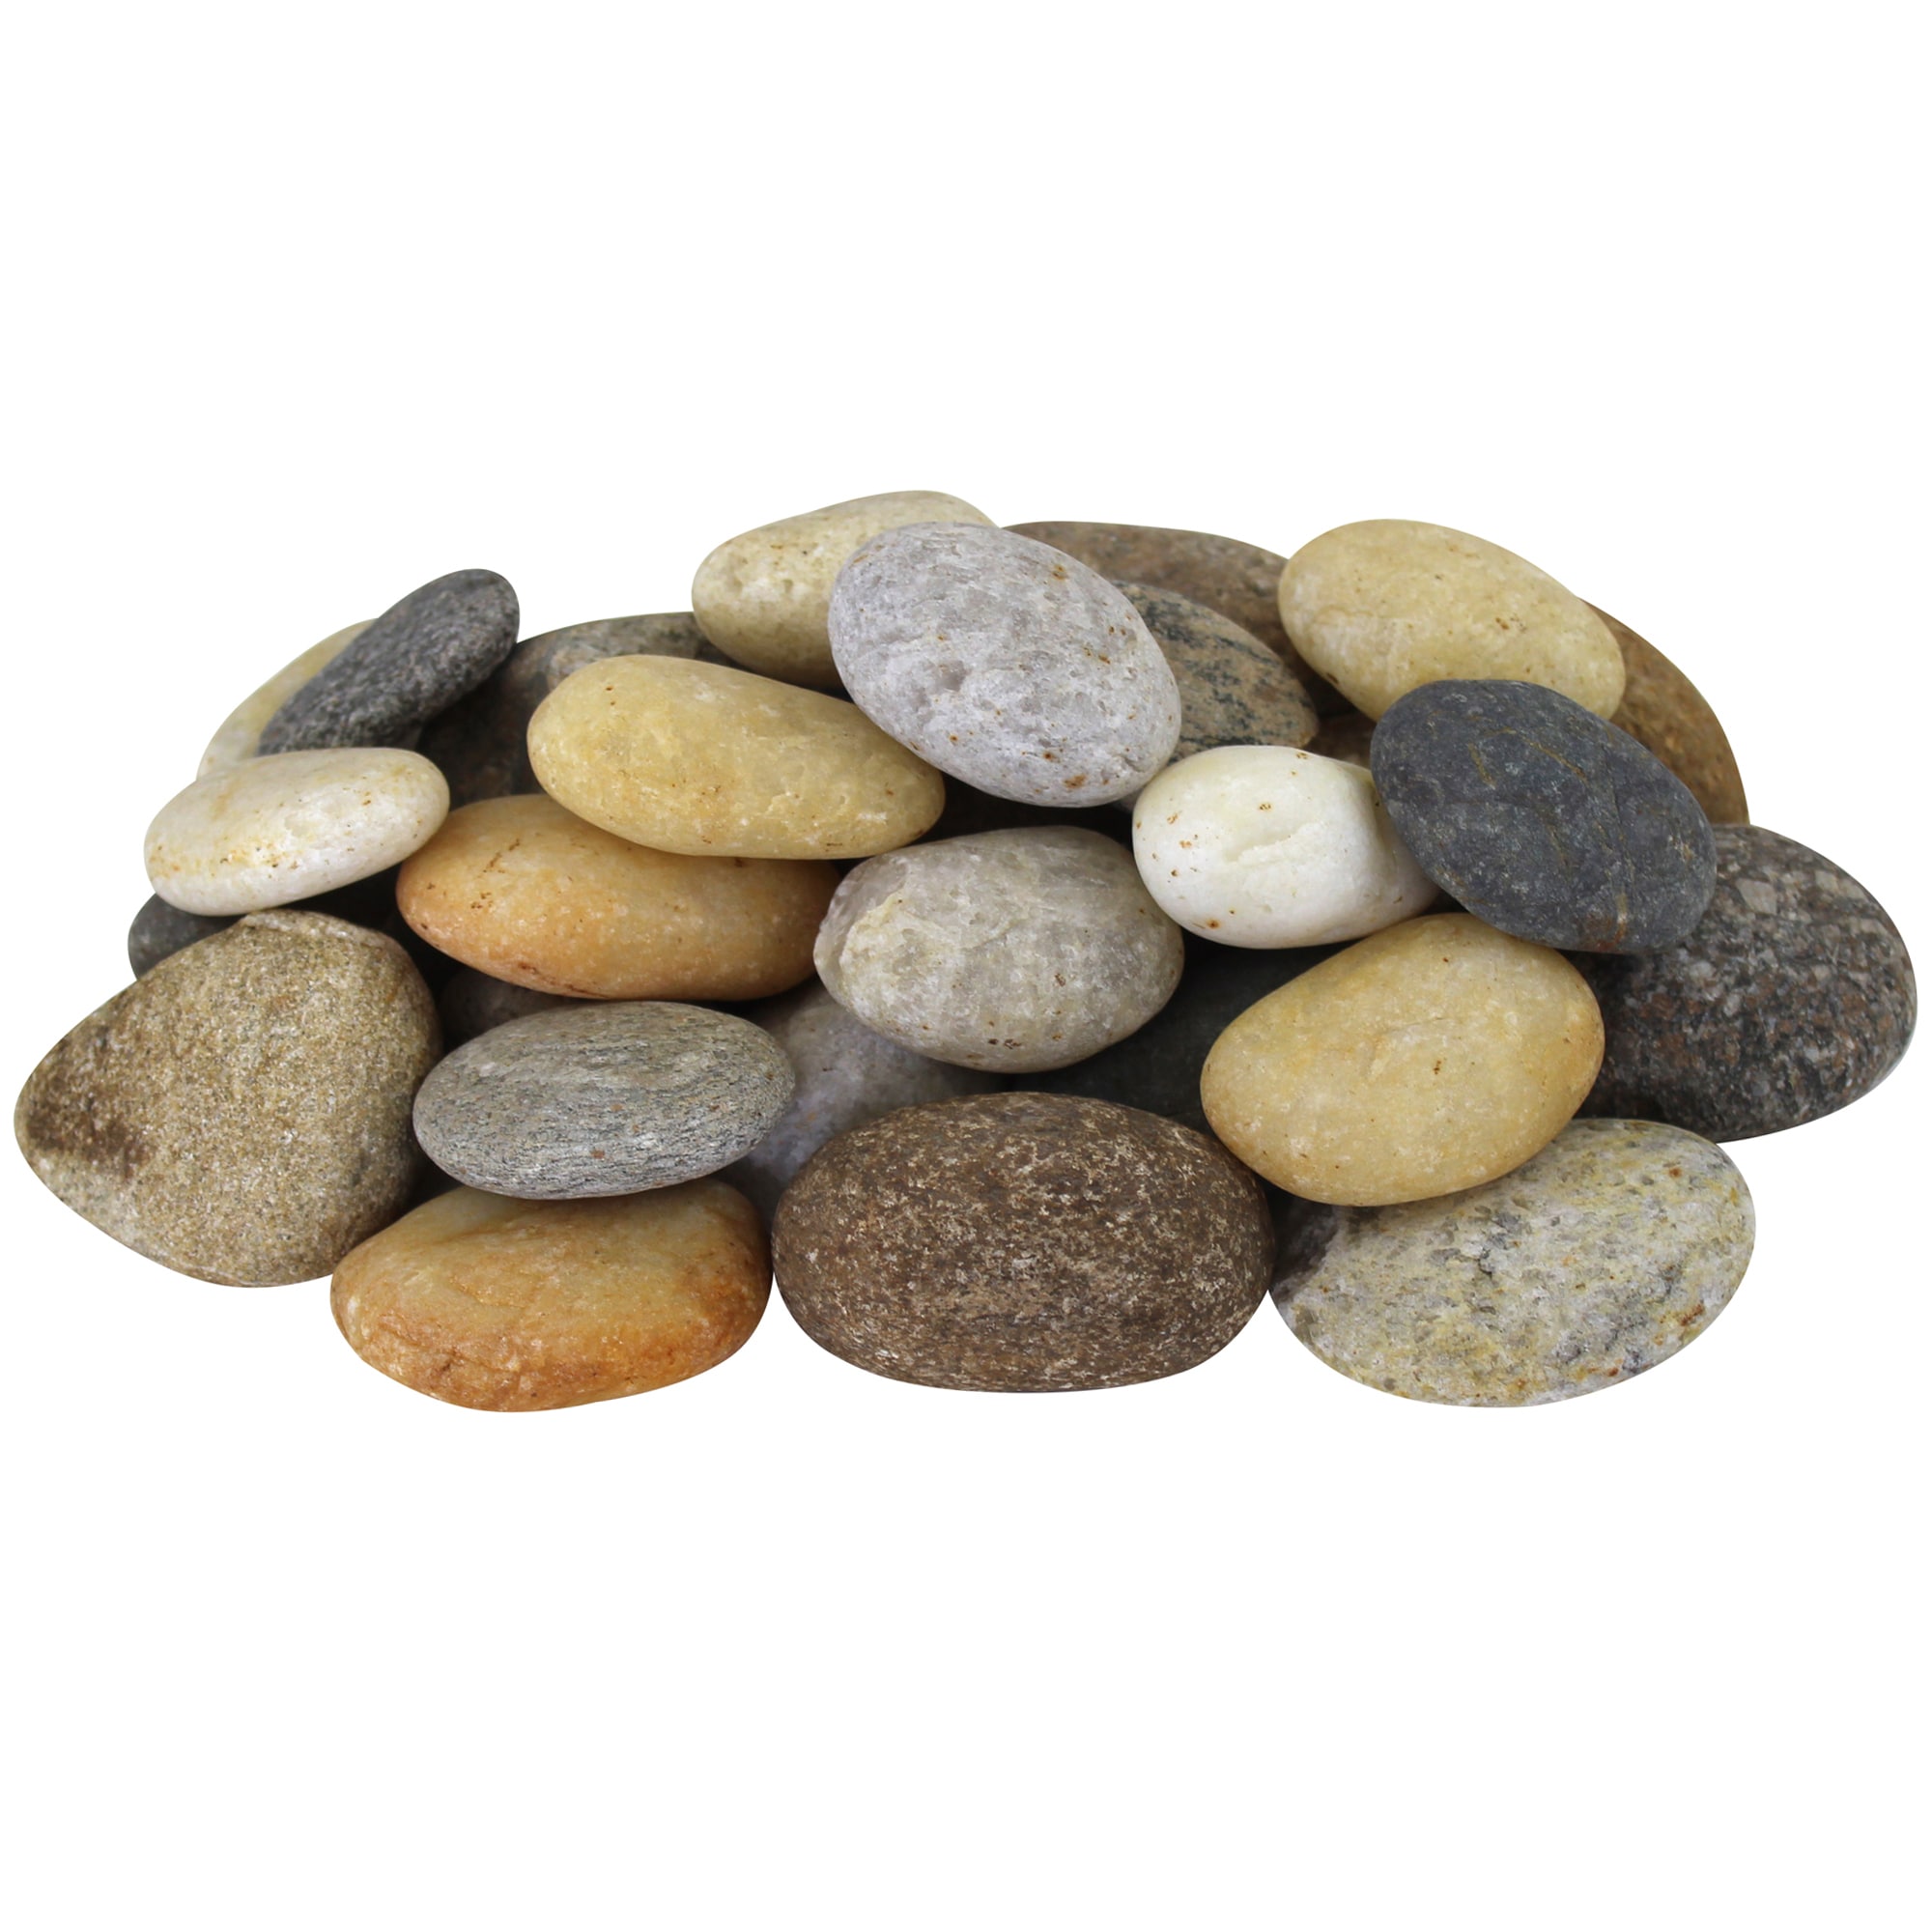 Paint rocks(I bought a bag of decorative white rocks at Lowes) red, white,  and blue and form into our American Fla… | Rock decor, Paint rock,  Landscaping with rocks